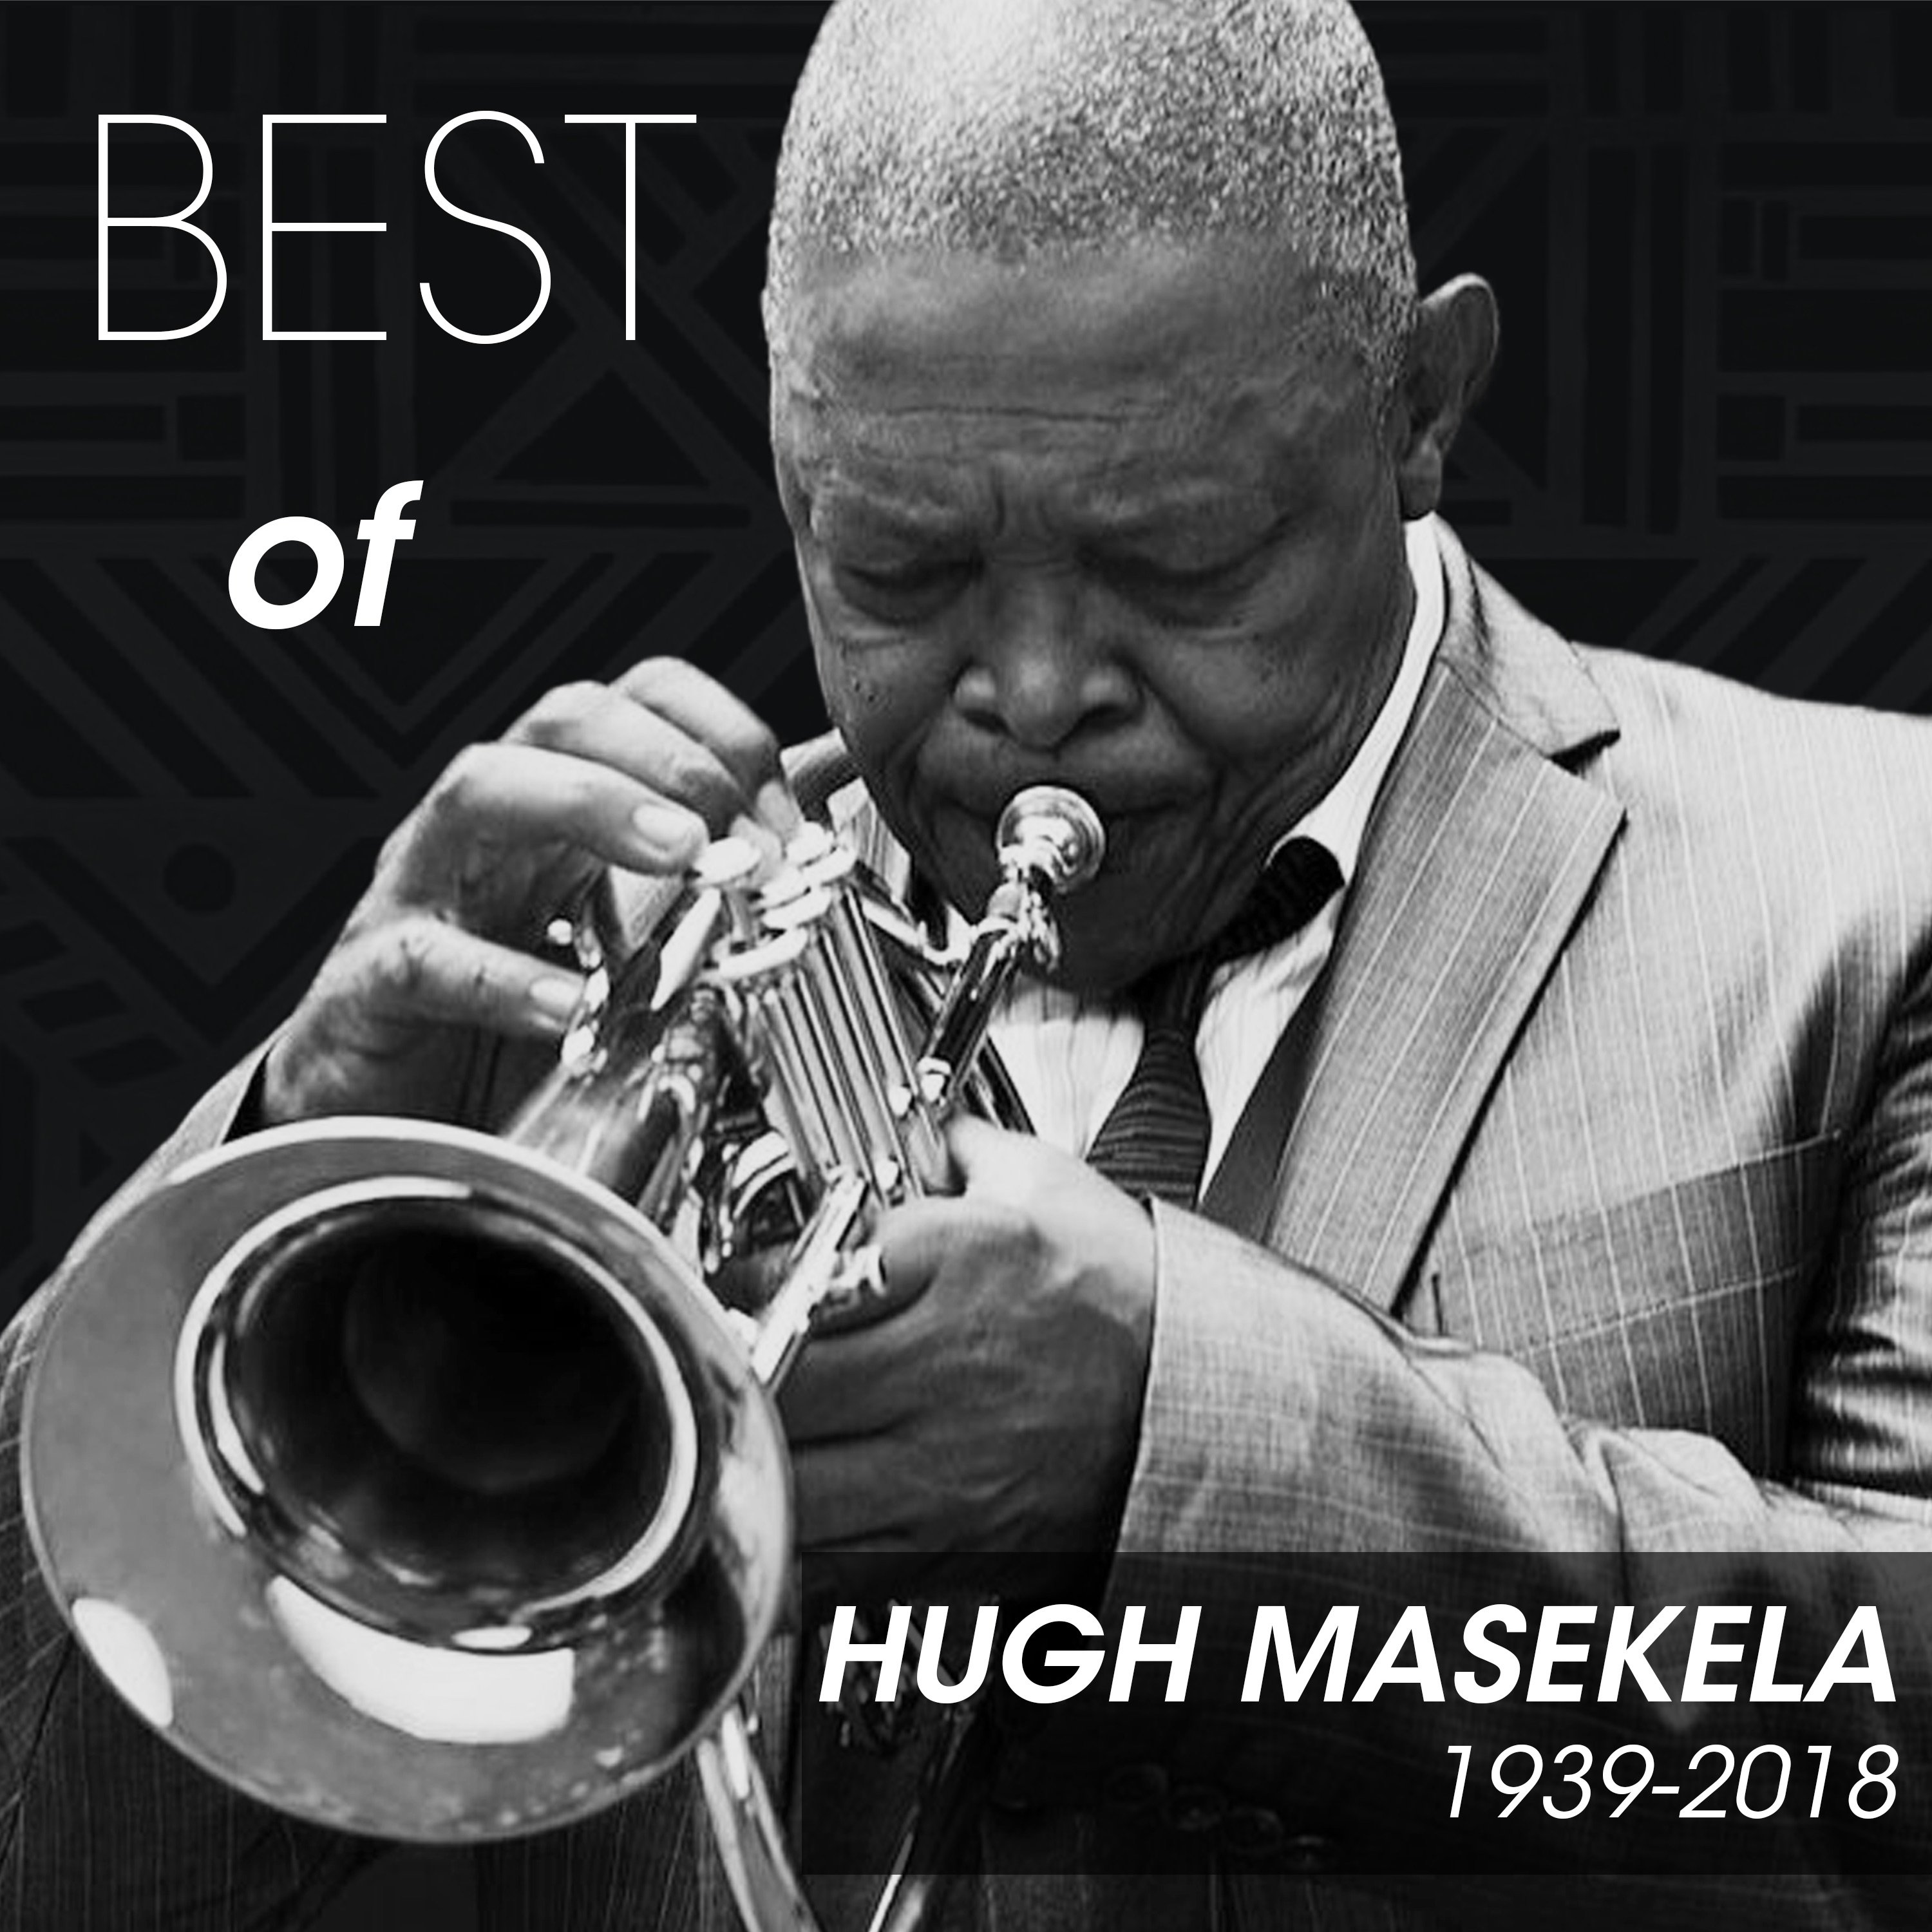 The 20 Best Songs From Hugh Masekela Okayafrica Does anyone know/have the english lyrics for this song? 20 essential hugh masekela songs